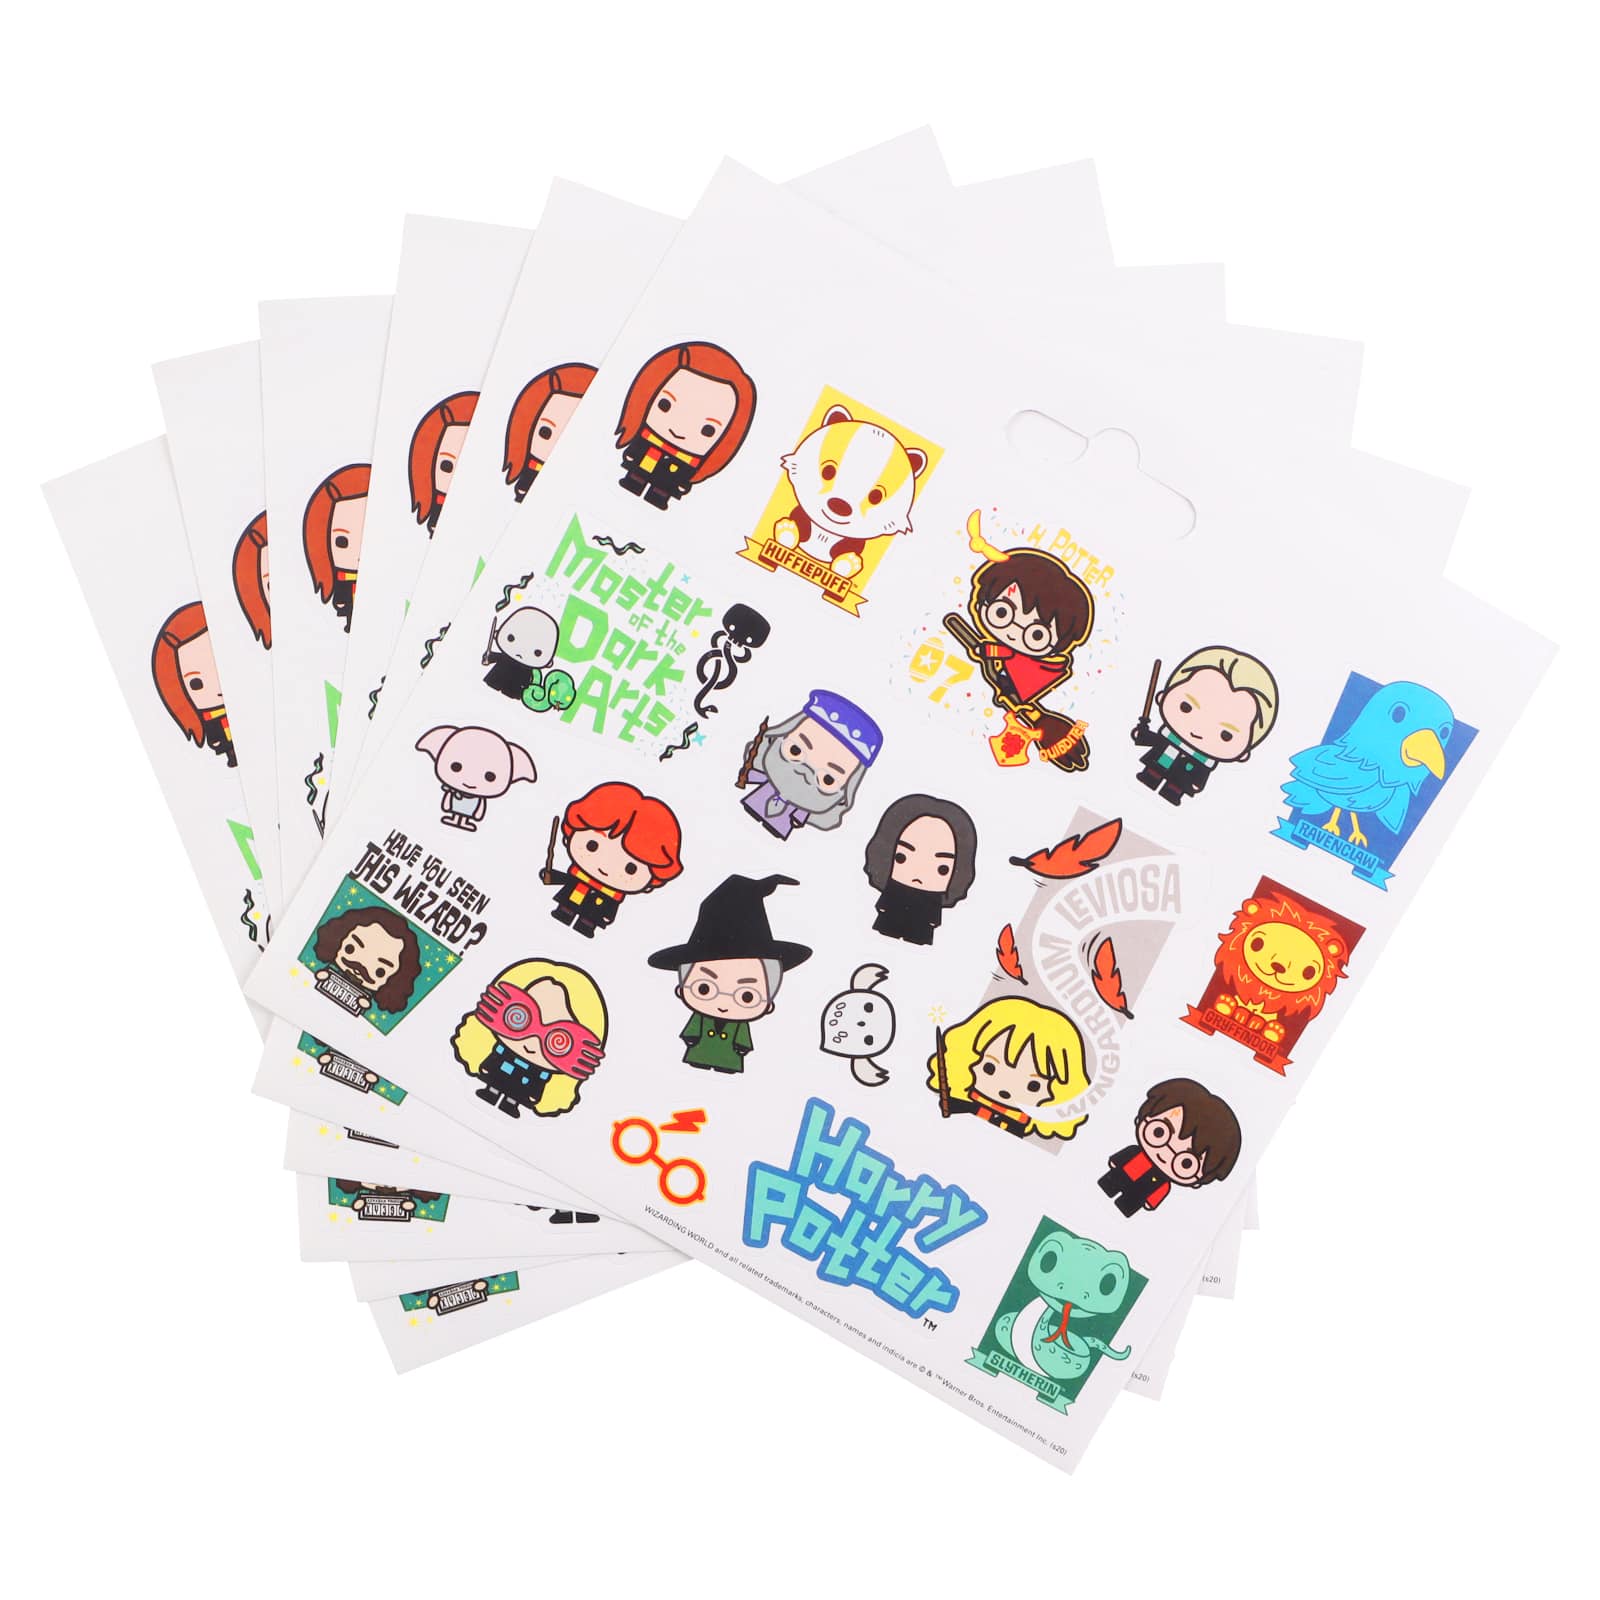  Wizard World Harry Potter Party Favors Stickers Bundle